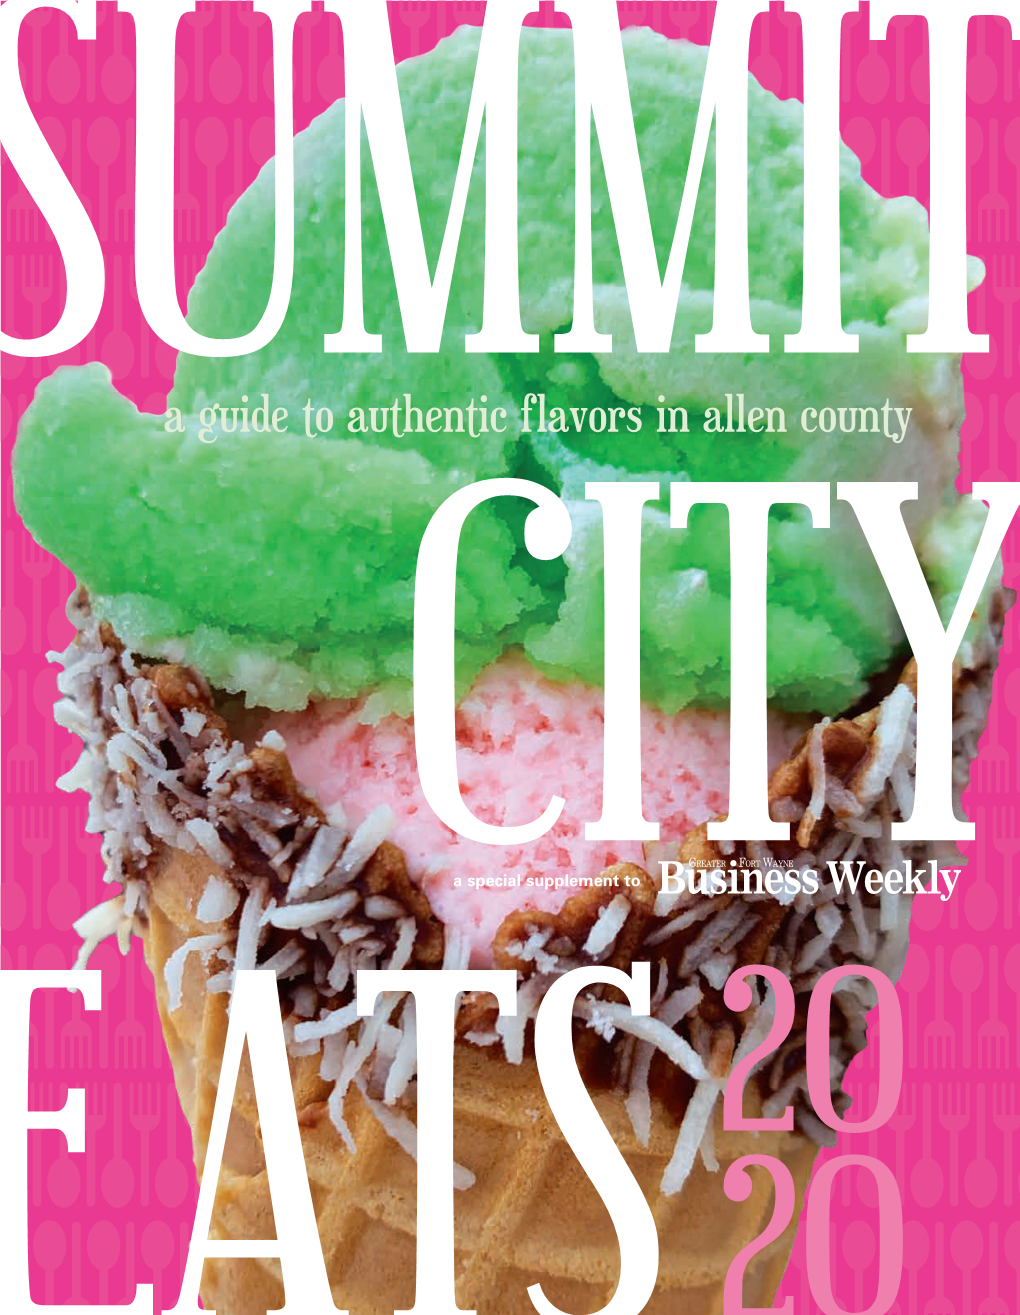 A Guide to Authentic Flavors in Allen County CITY a Special Supplement to 20 EATS 20 Proudly Made in Indiana